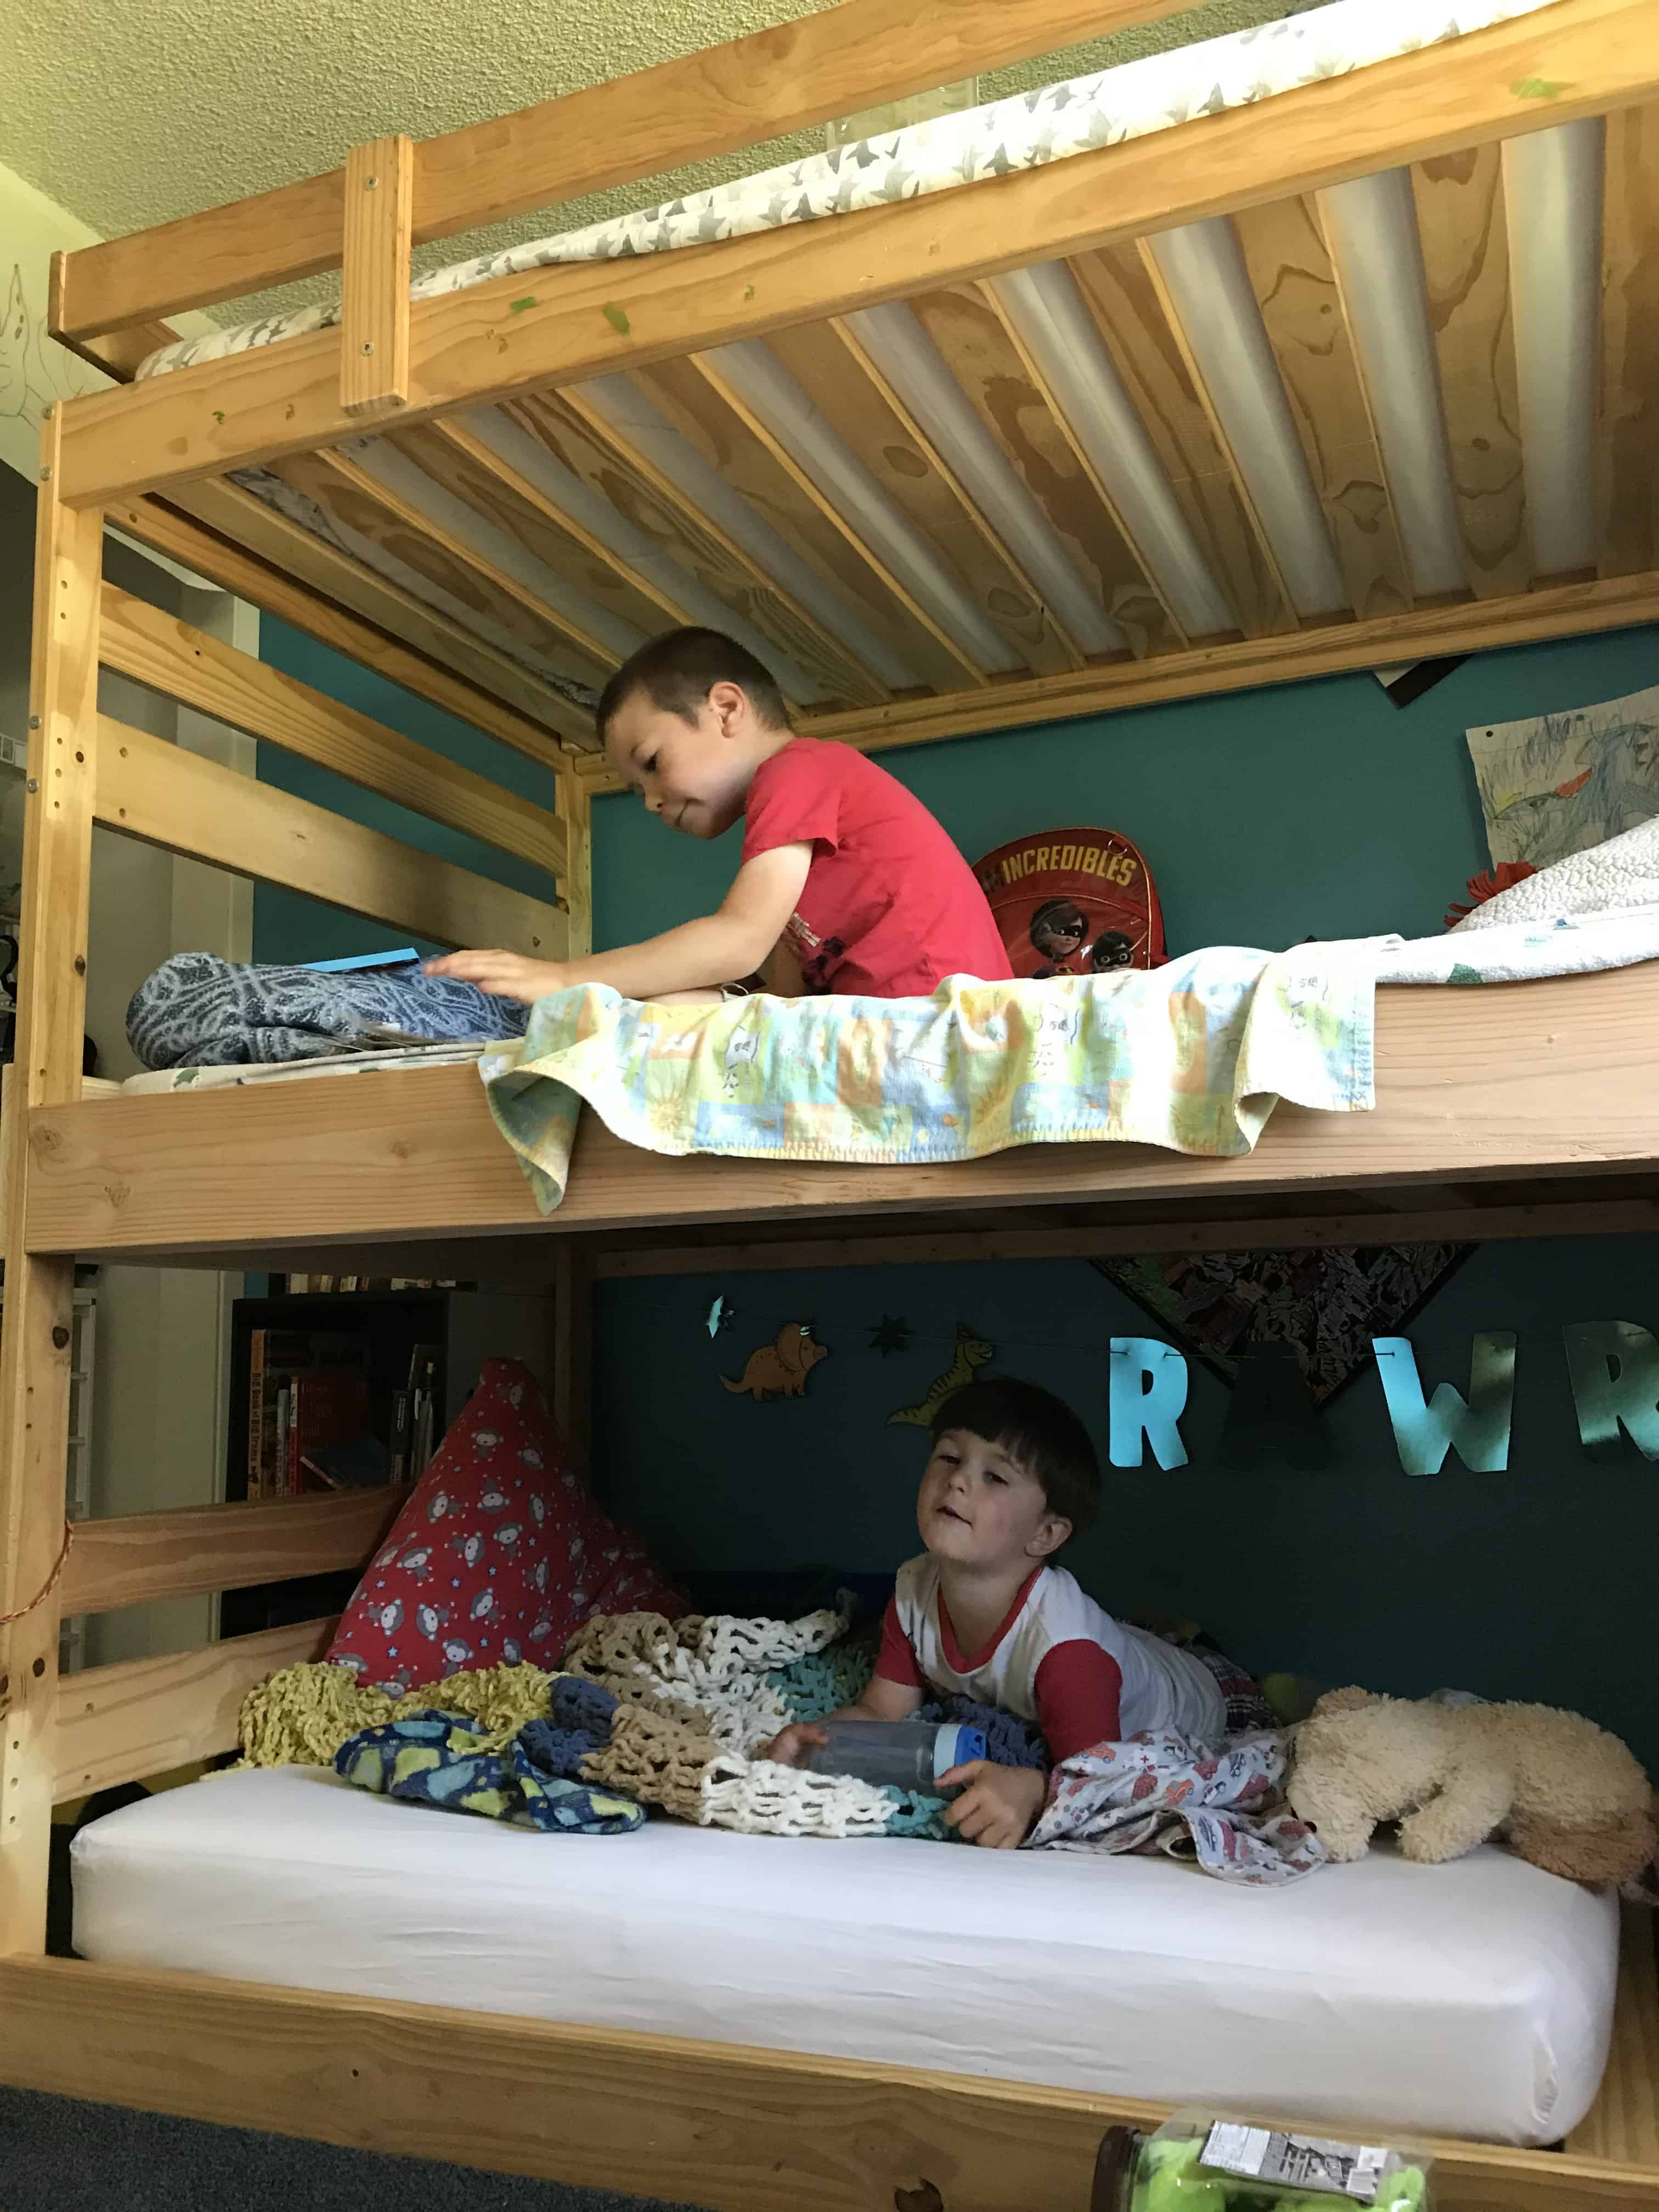 Boys on bunk bed in preparation for at-home date night. Date nights for married couples.